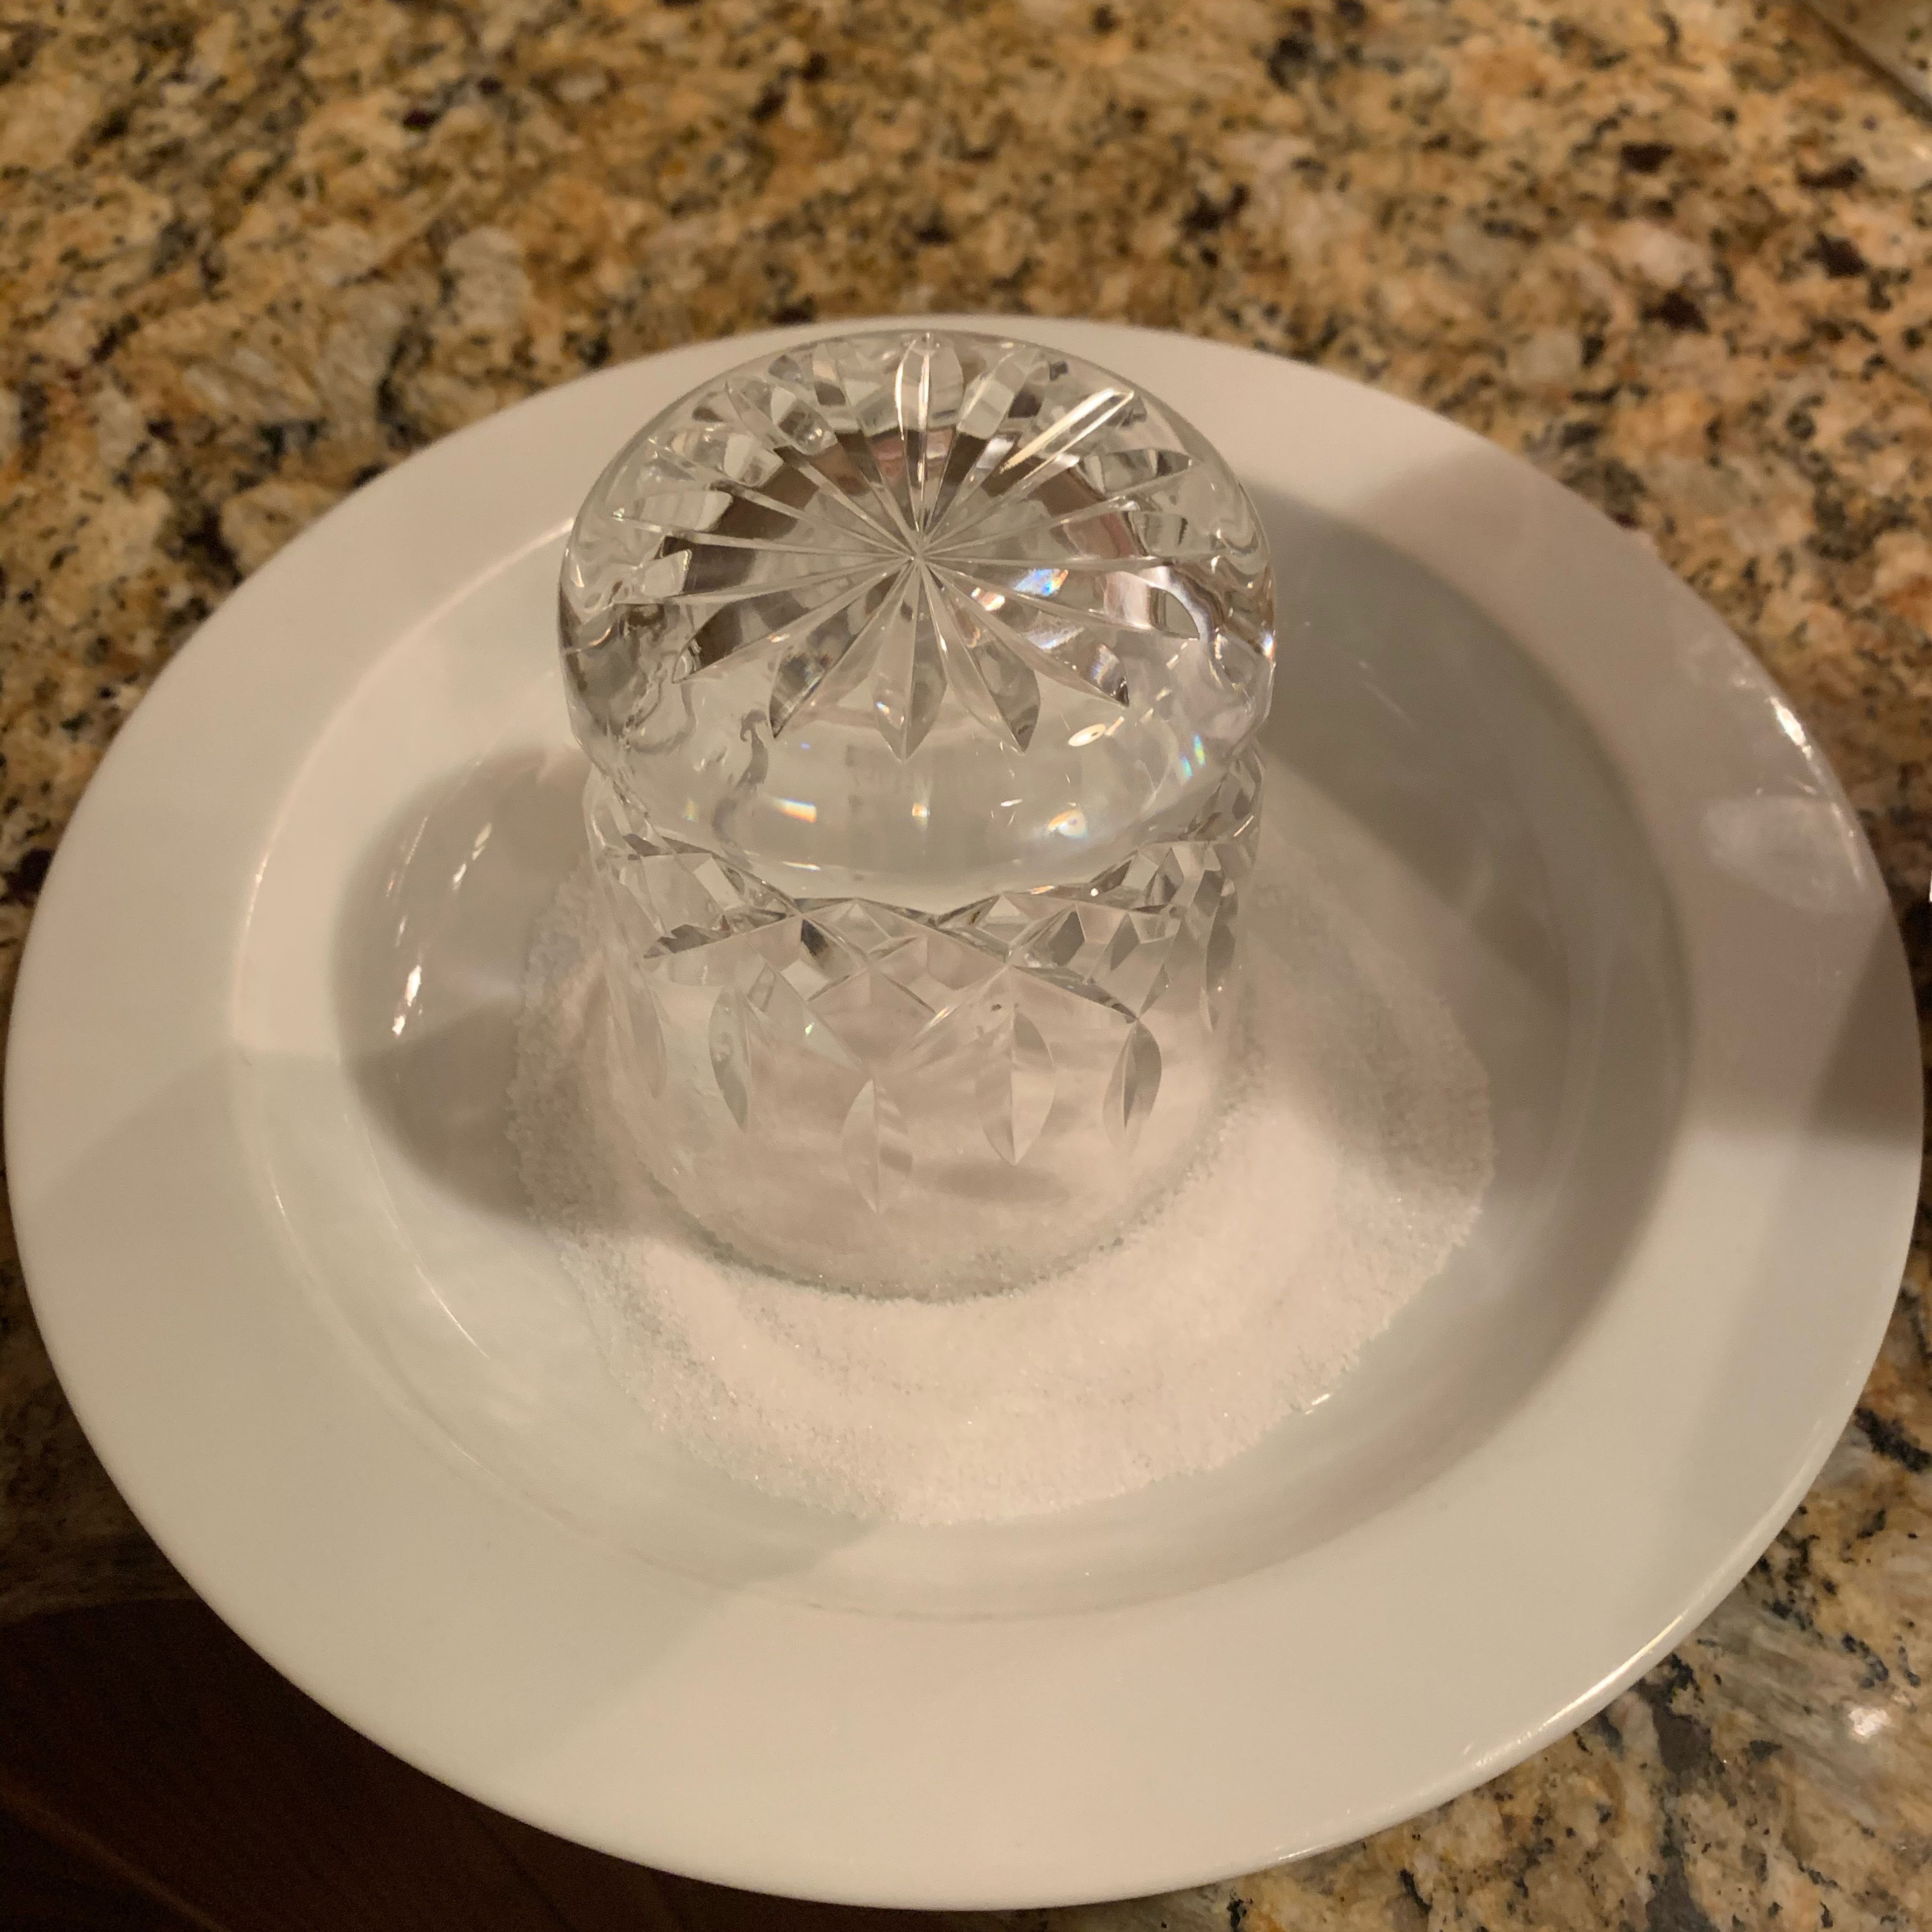 Coat rim of glass with remaining lemon juice and dip into sugar.